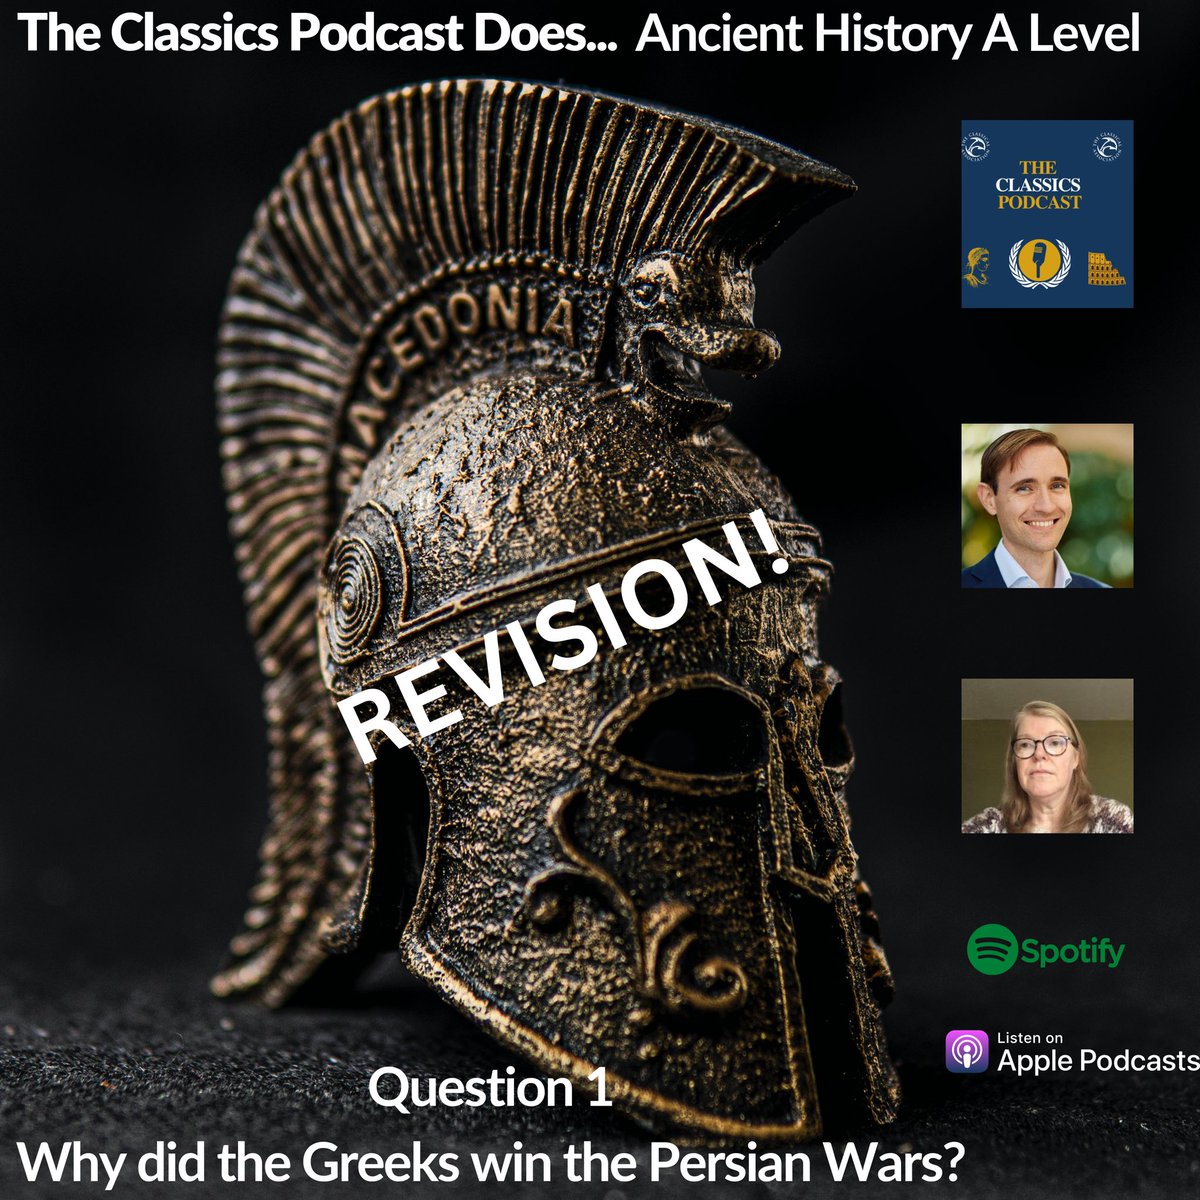 Here to support you in Revision Season 💫 Ancient History A Level students and teachers - Greek Period Study bitesized podcasts out daily until exams start! Feat @Roelkonijn @LynetteMitchel1 @jajrenshaw podcasters.spotify.com/pod/show/the-c…